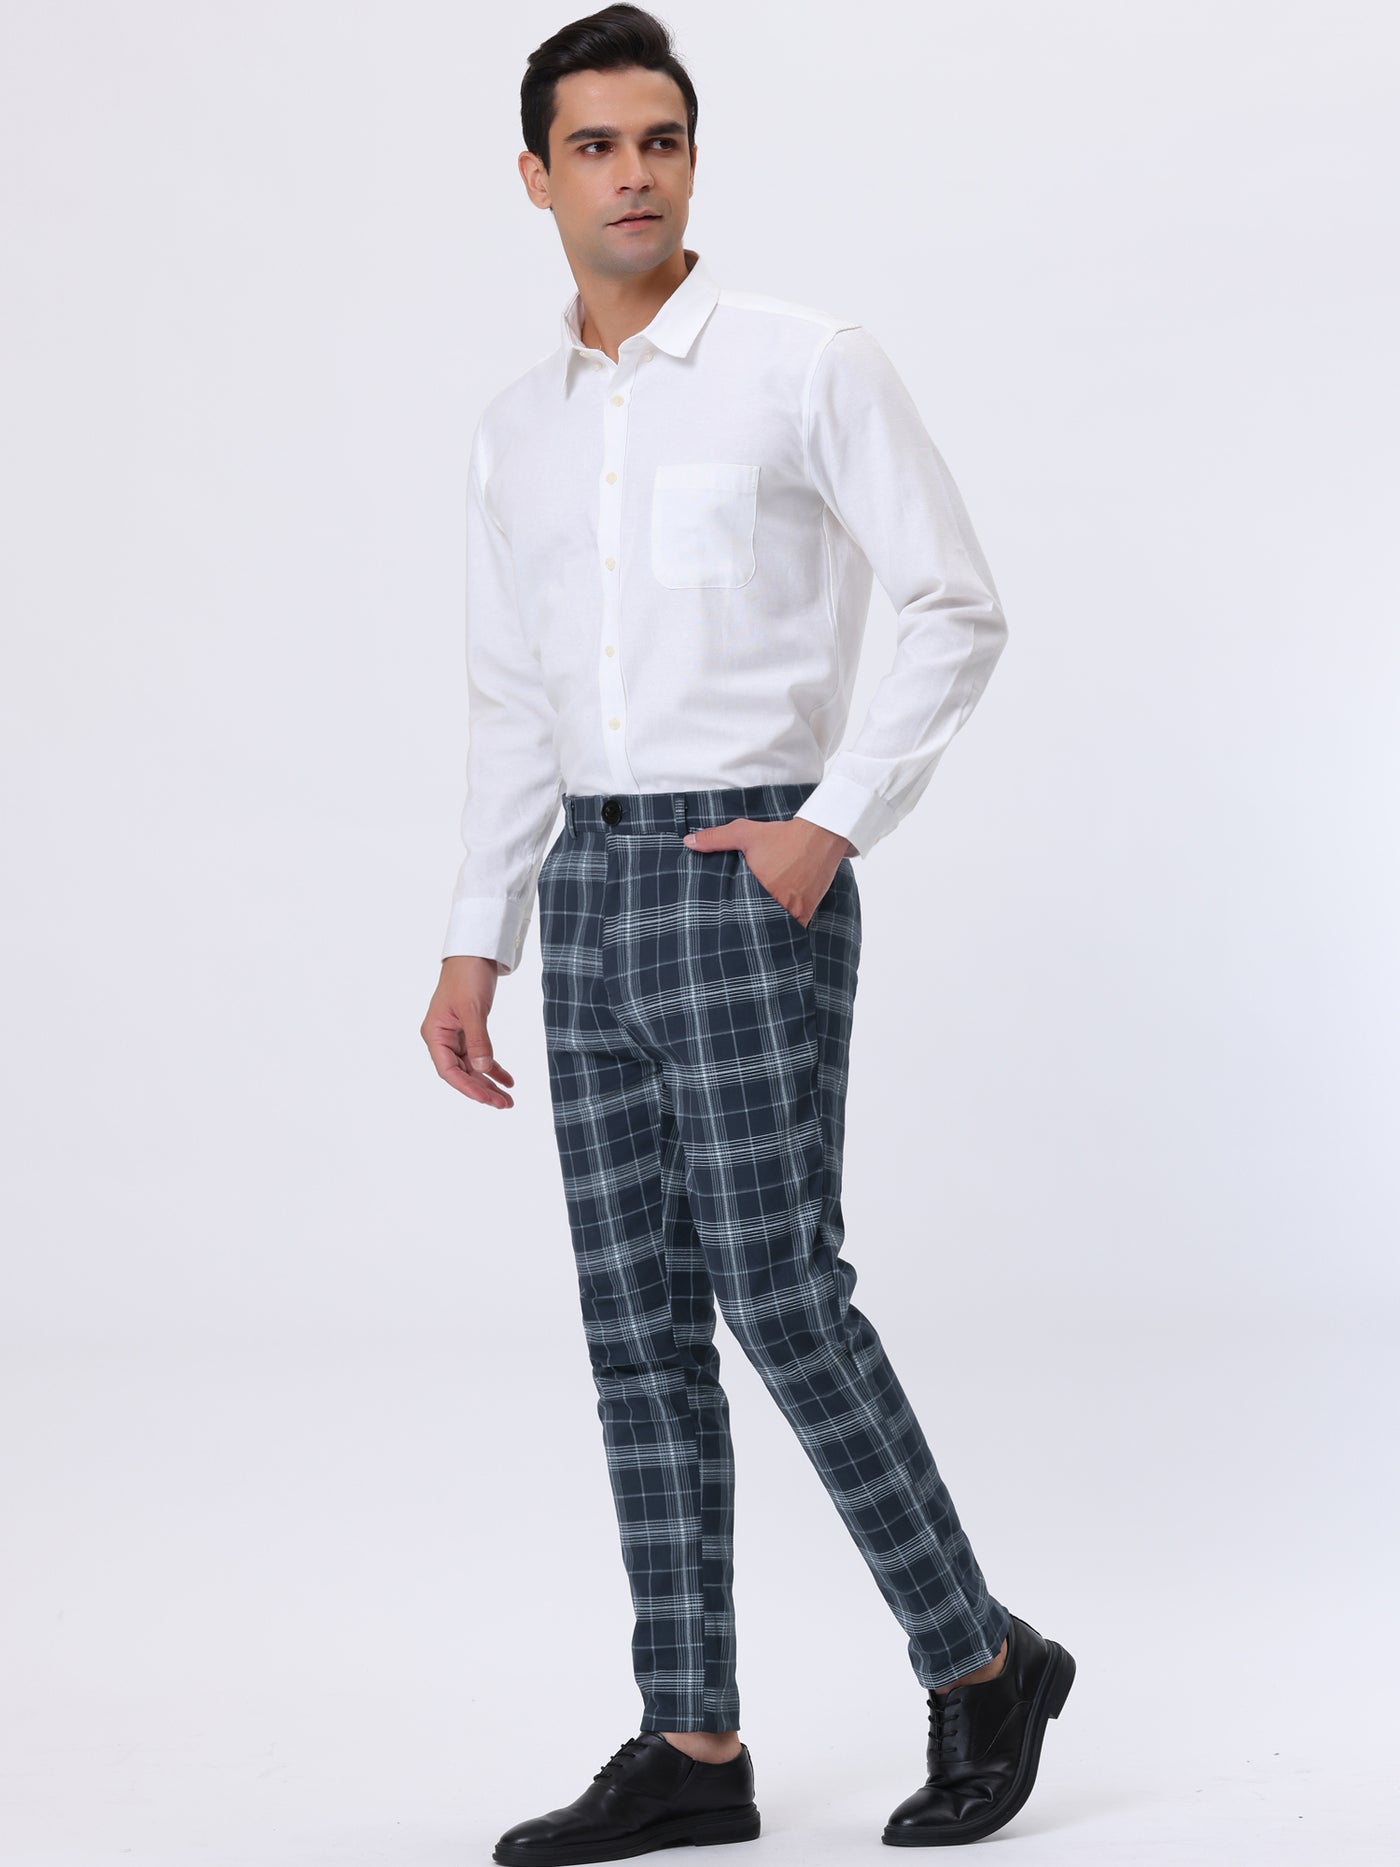 Bublédon Men's Plaid Slim Fit Trousers Flat Front Casual Checked Printed Dress Pants